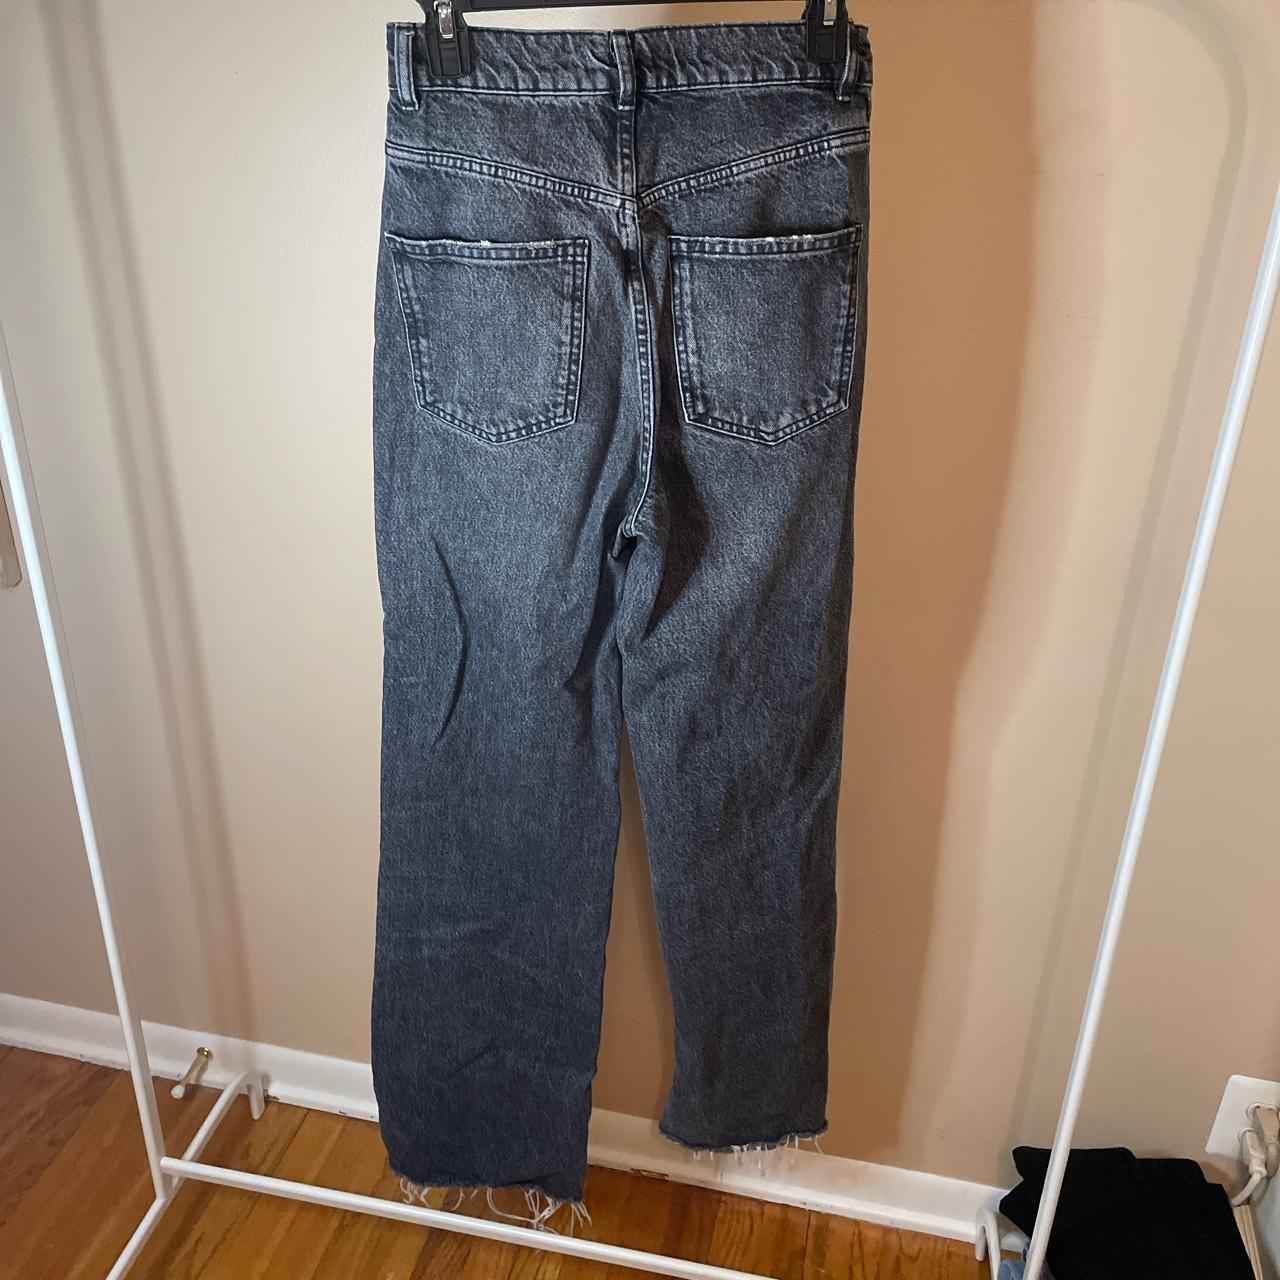 ZARA boyfriend jeans - fits perfect and tight in the... - Depop